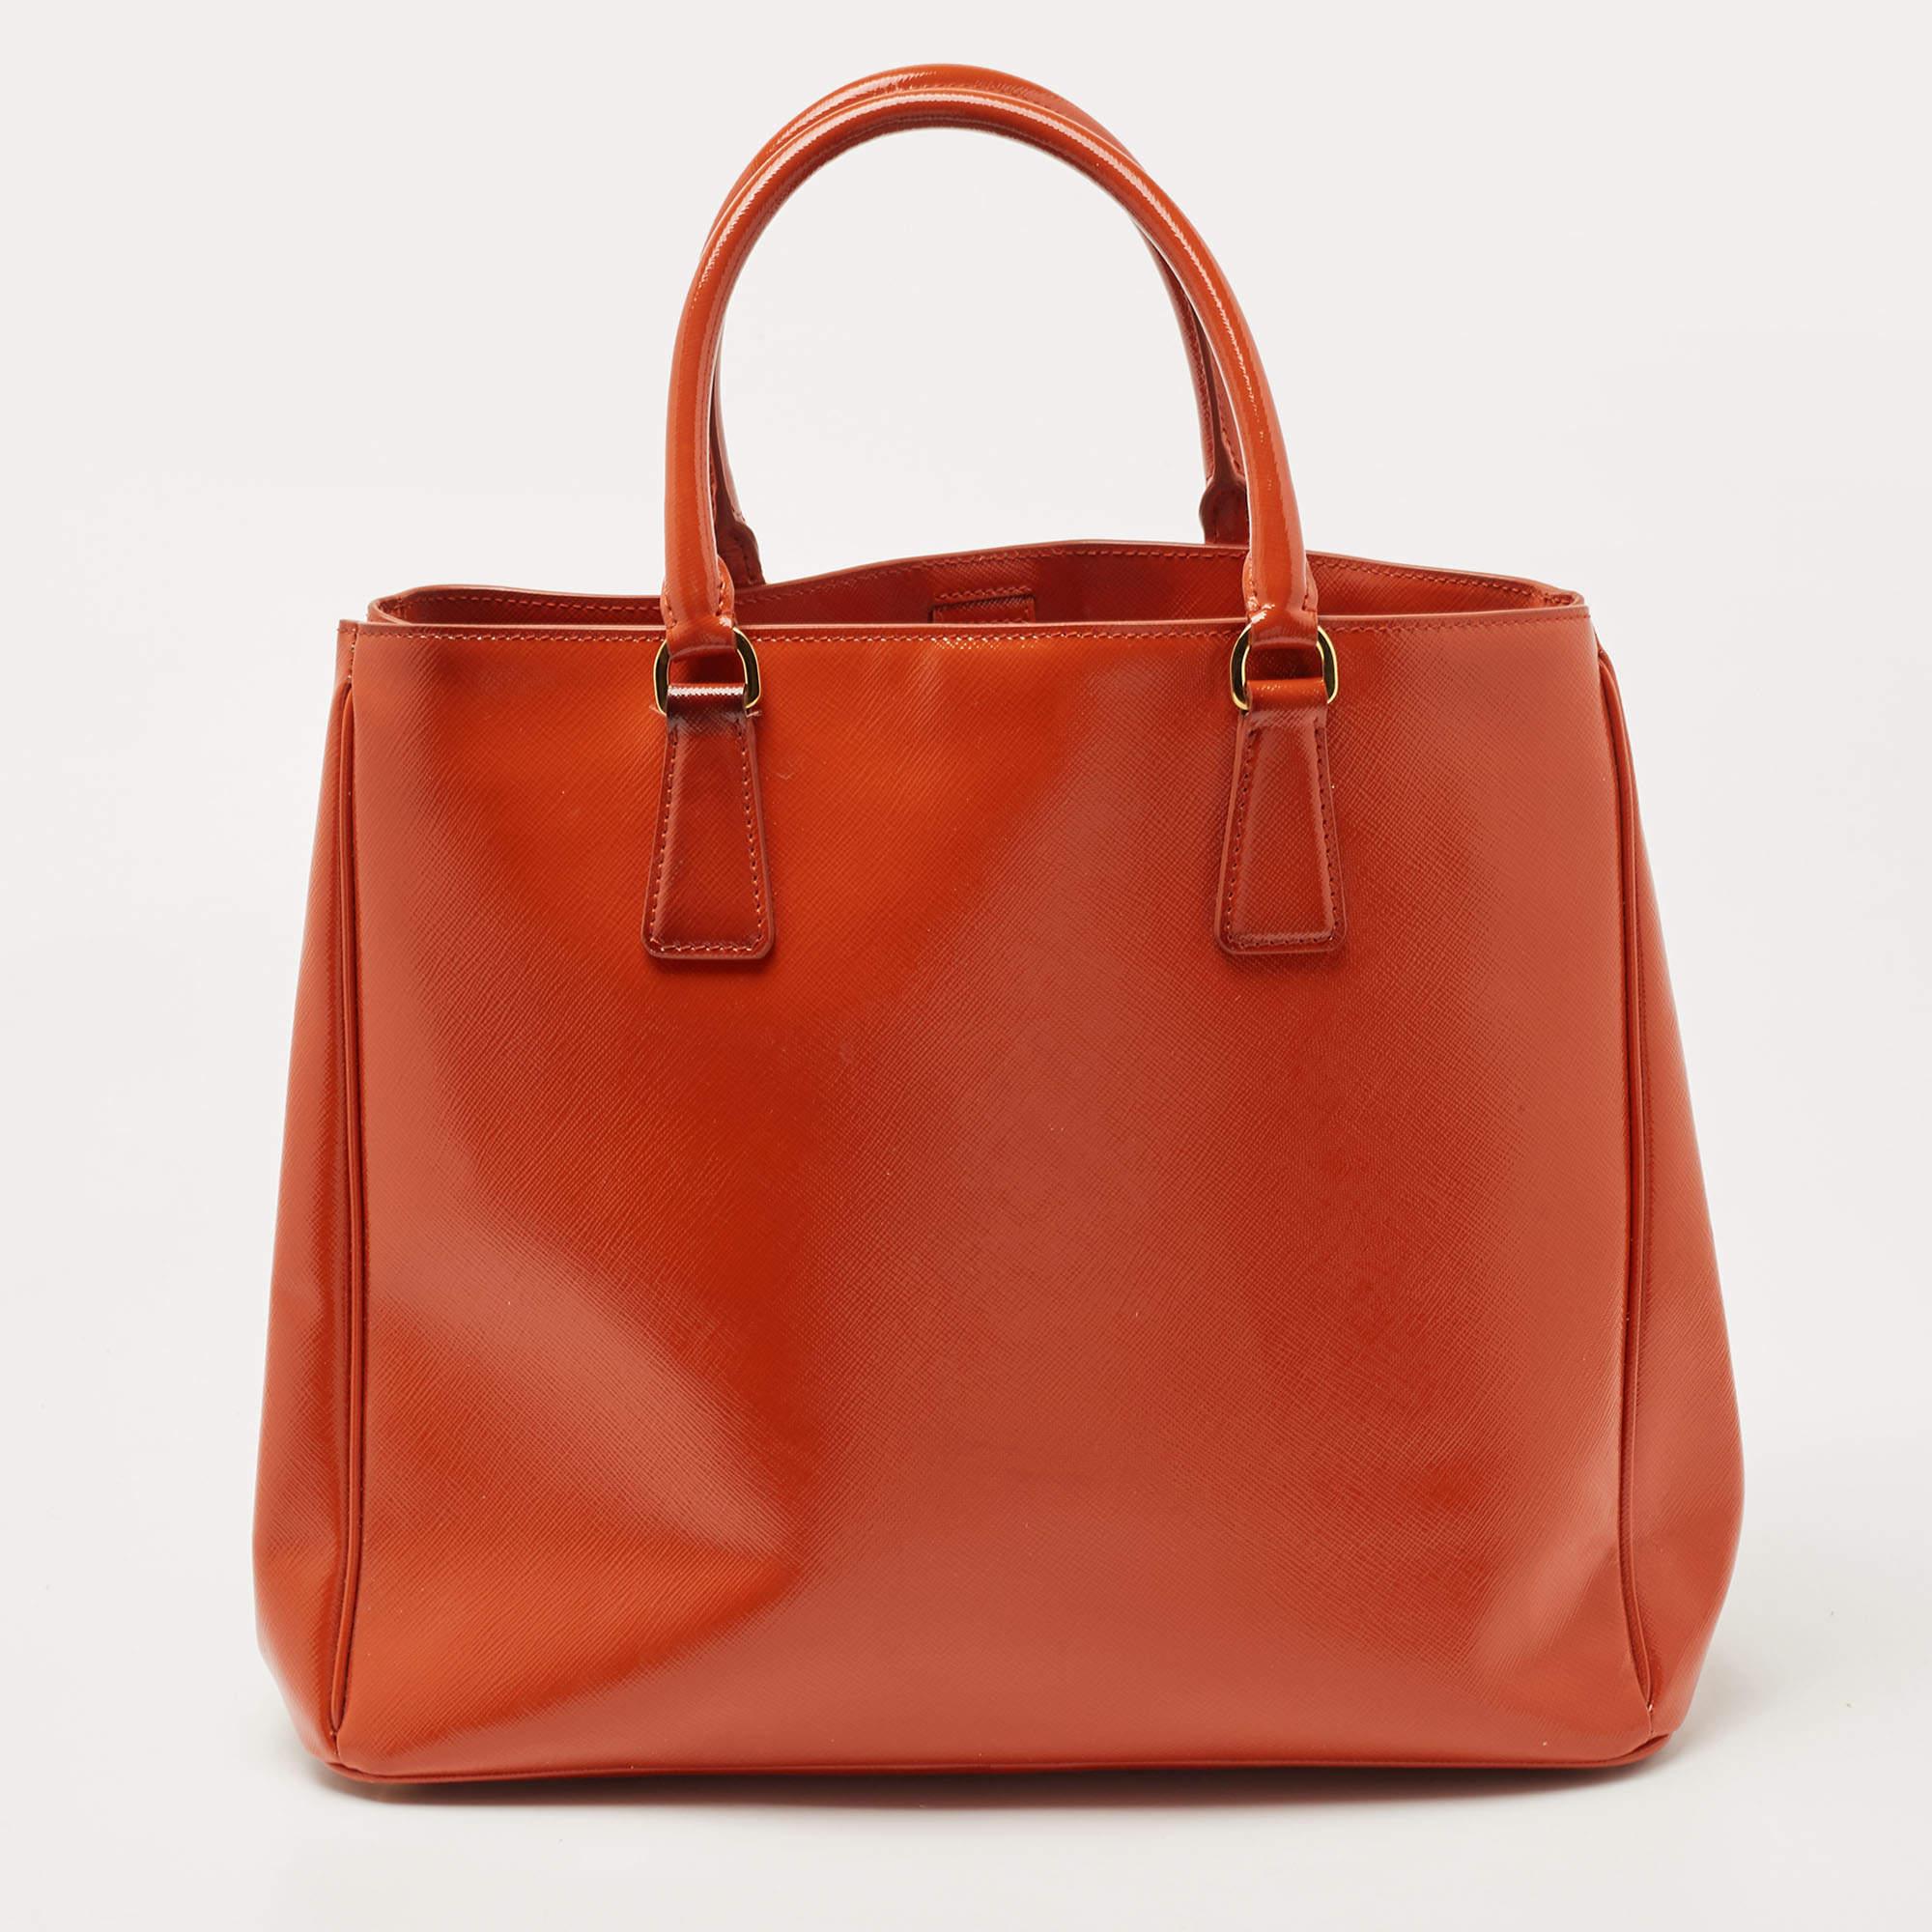 This Prada Saffiano tote for women is super classy and functional, perfect for everyday use. We like the simple details and its high-quality finish.

Includes:Detachable Strap
